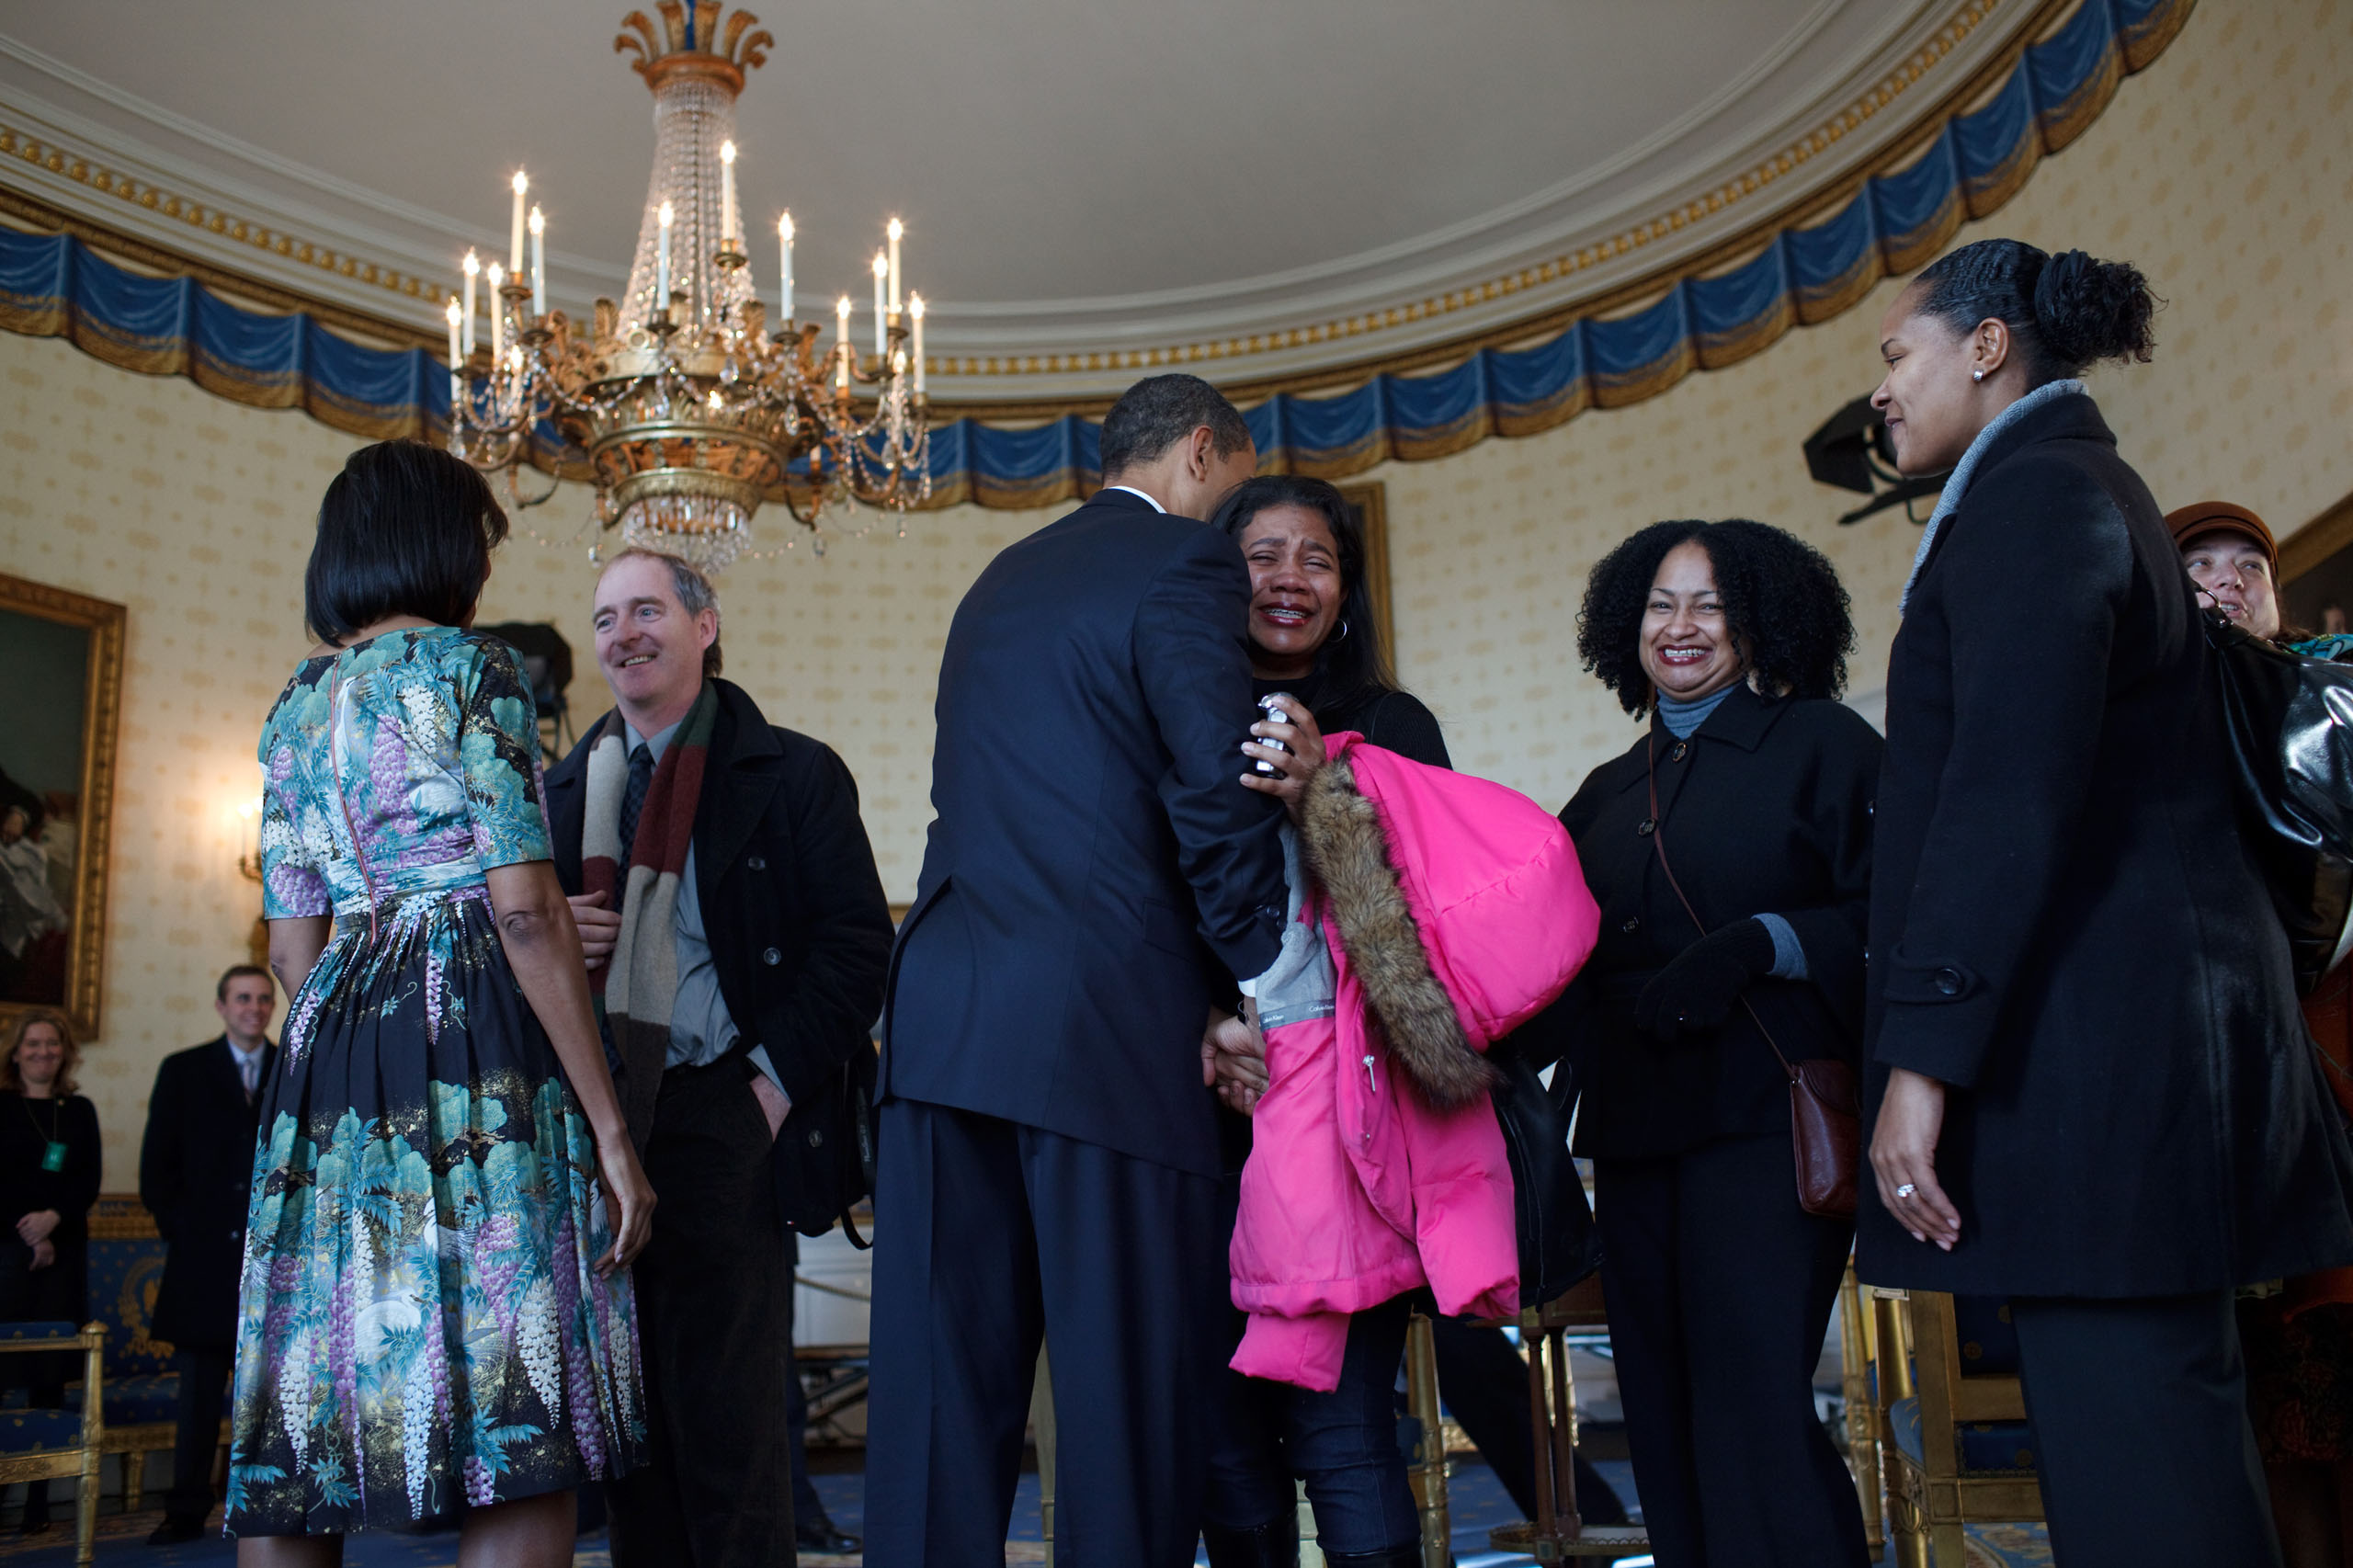 President Barack Obama and First Lady Michelle Obama receive visitors in the Blue Room at the White House, on Jan. 21, 2009.